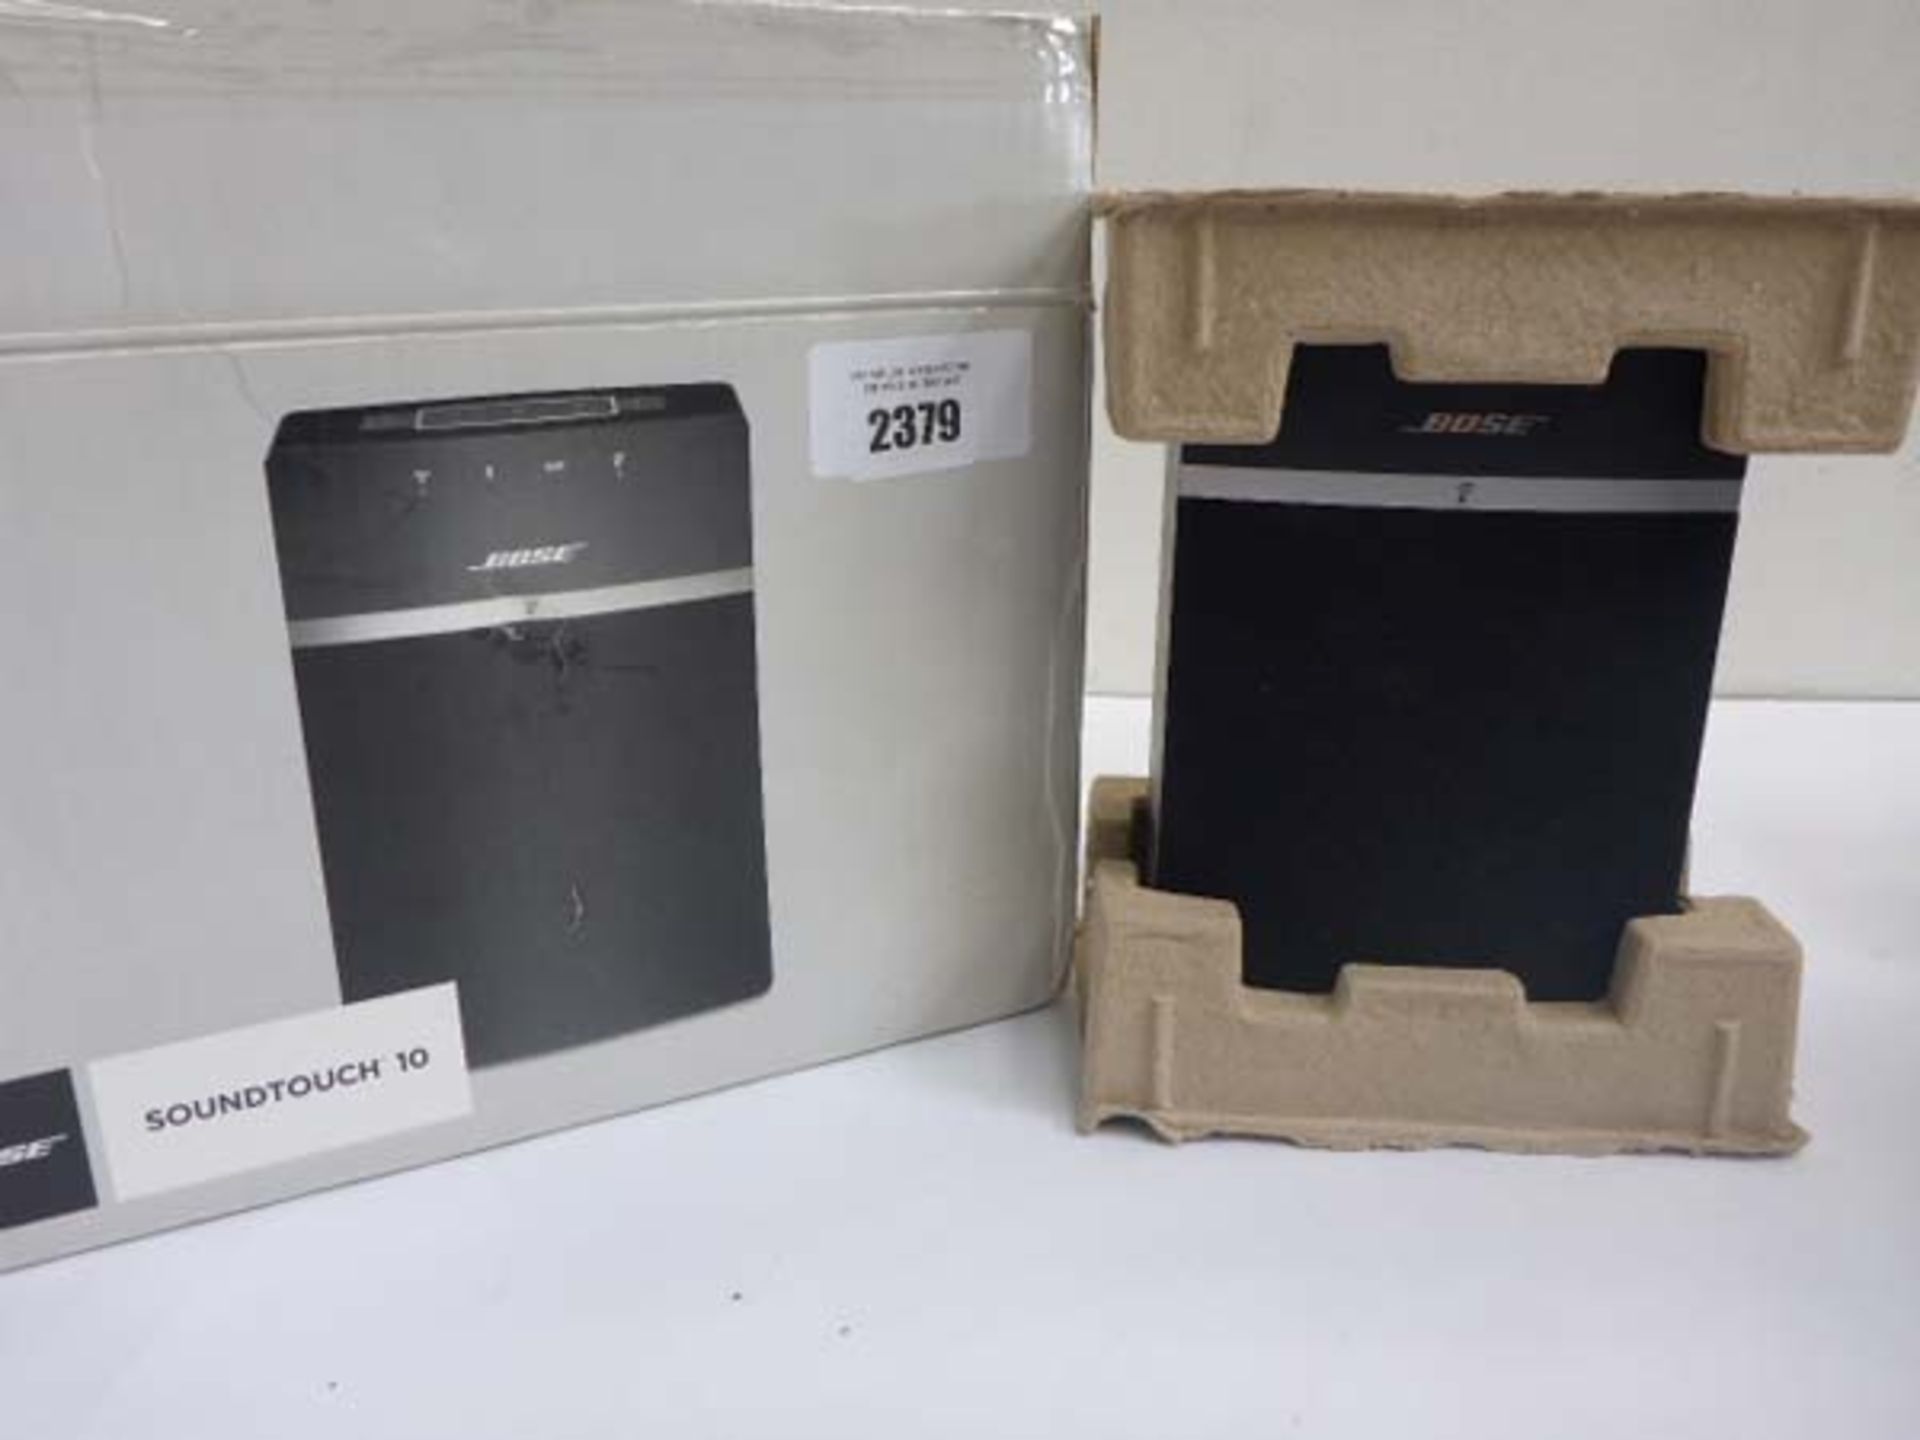 Bose Soundtouch 10 wireless music system